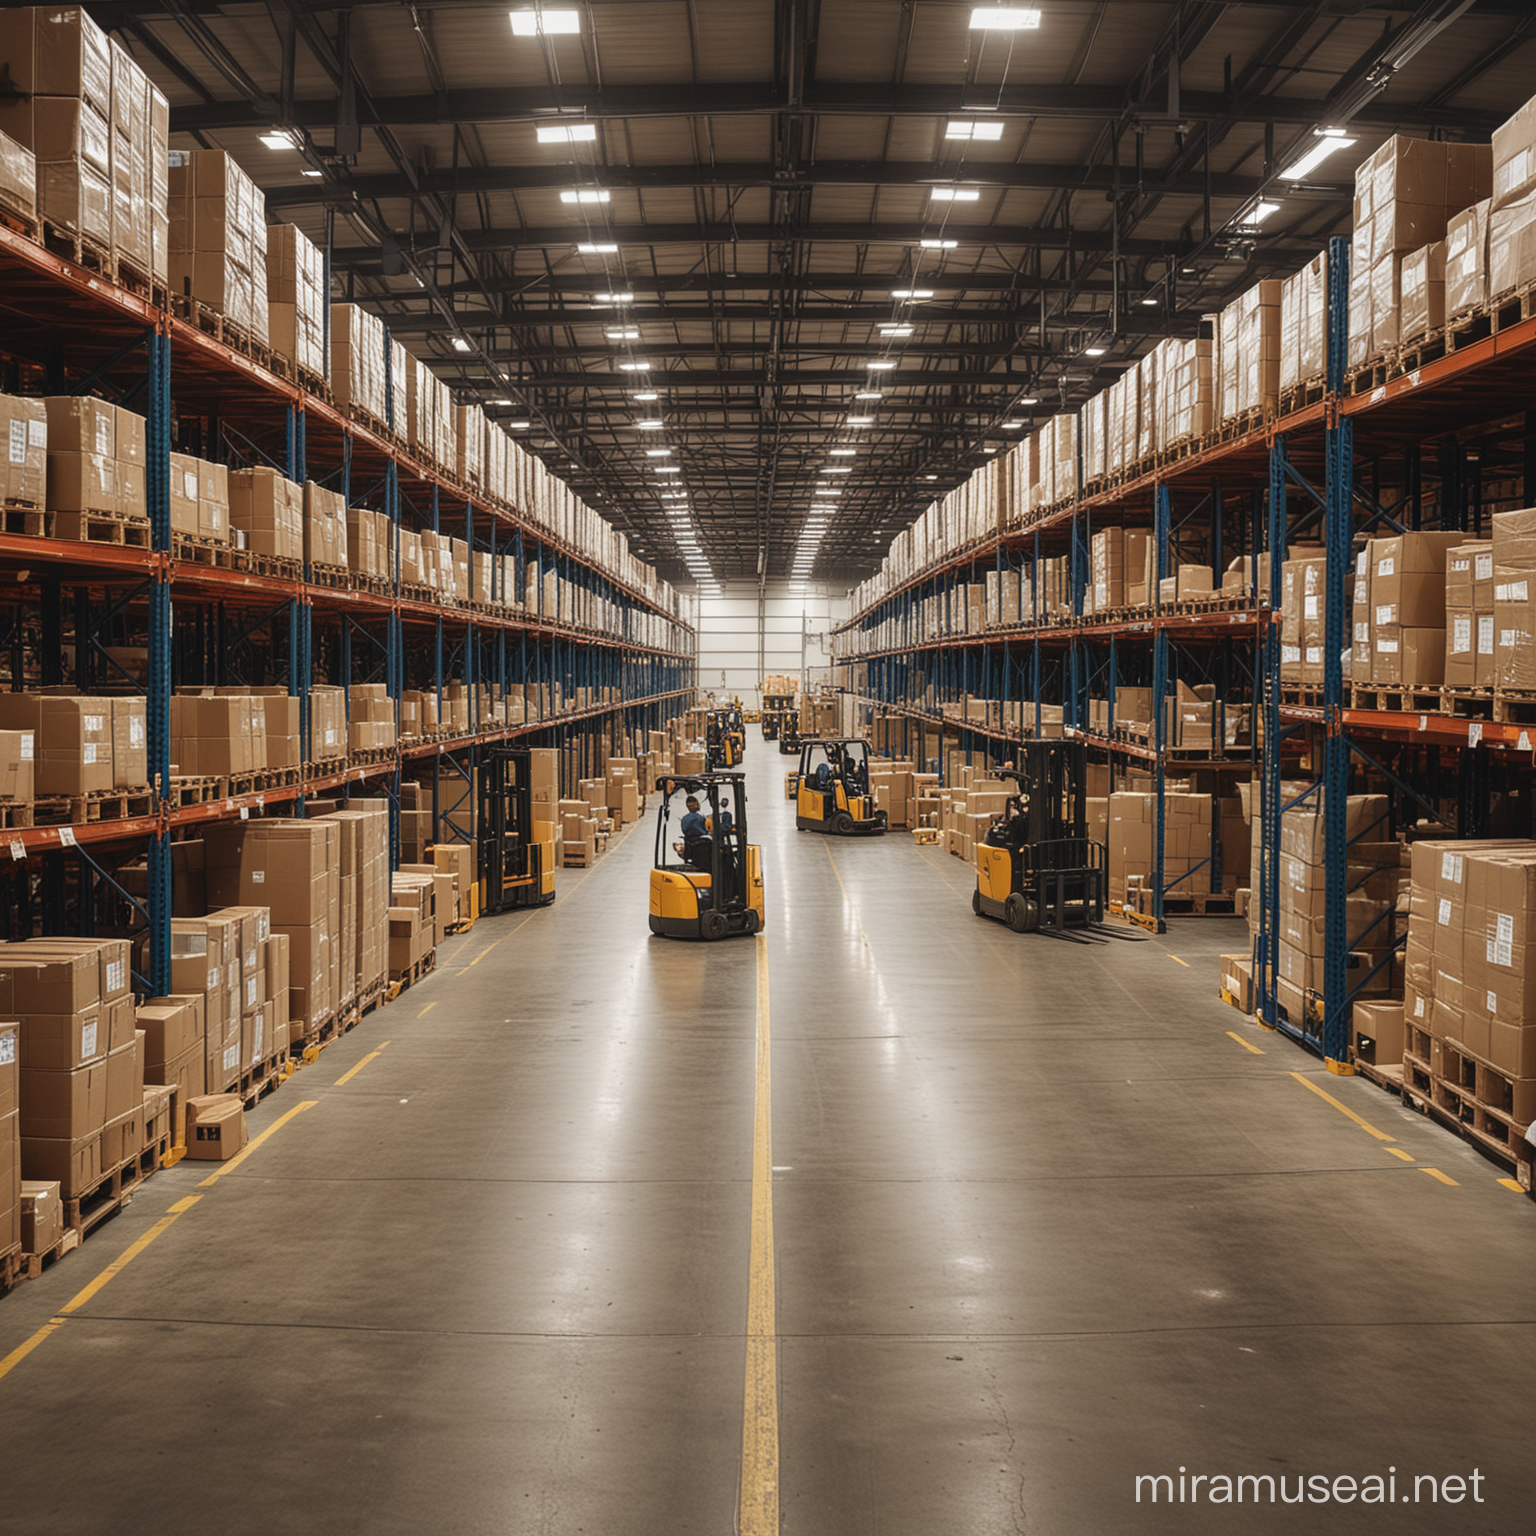 A warehouse in full operation with fork trucks and drivers

